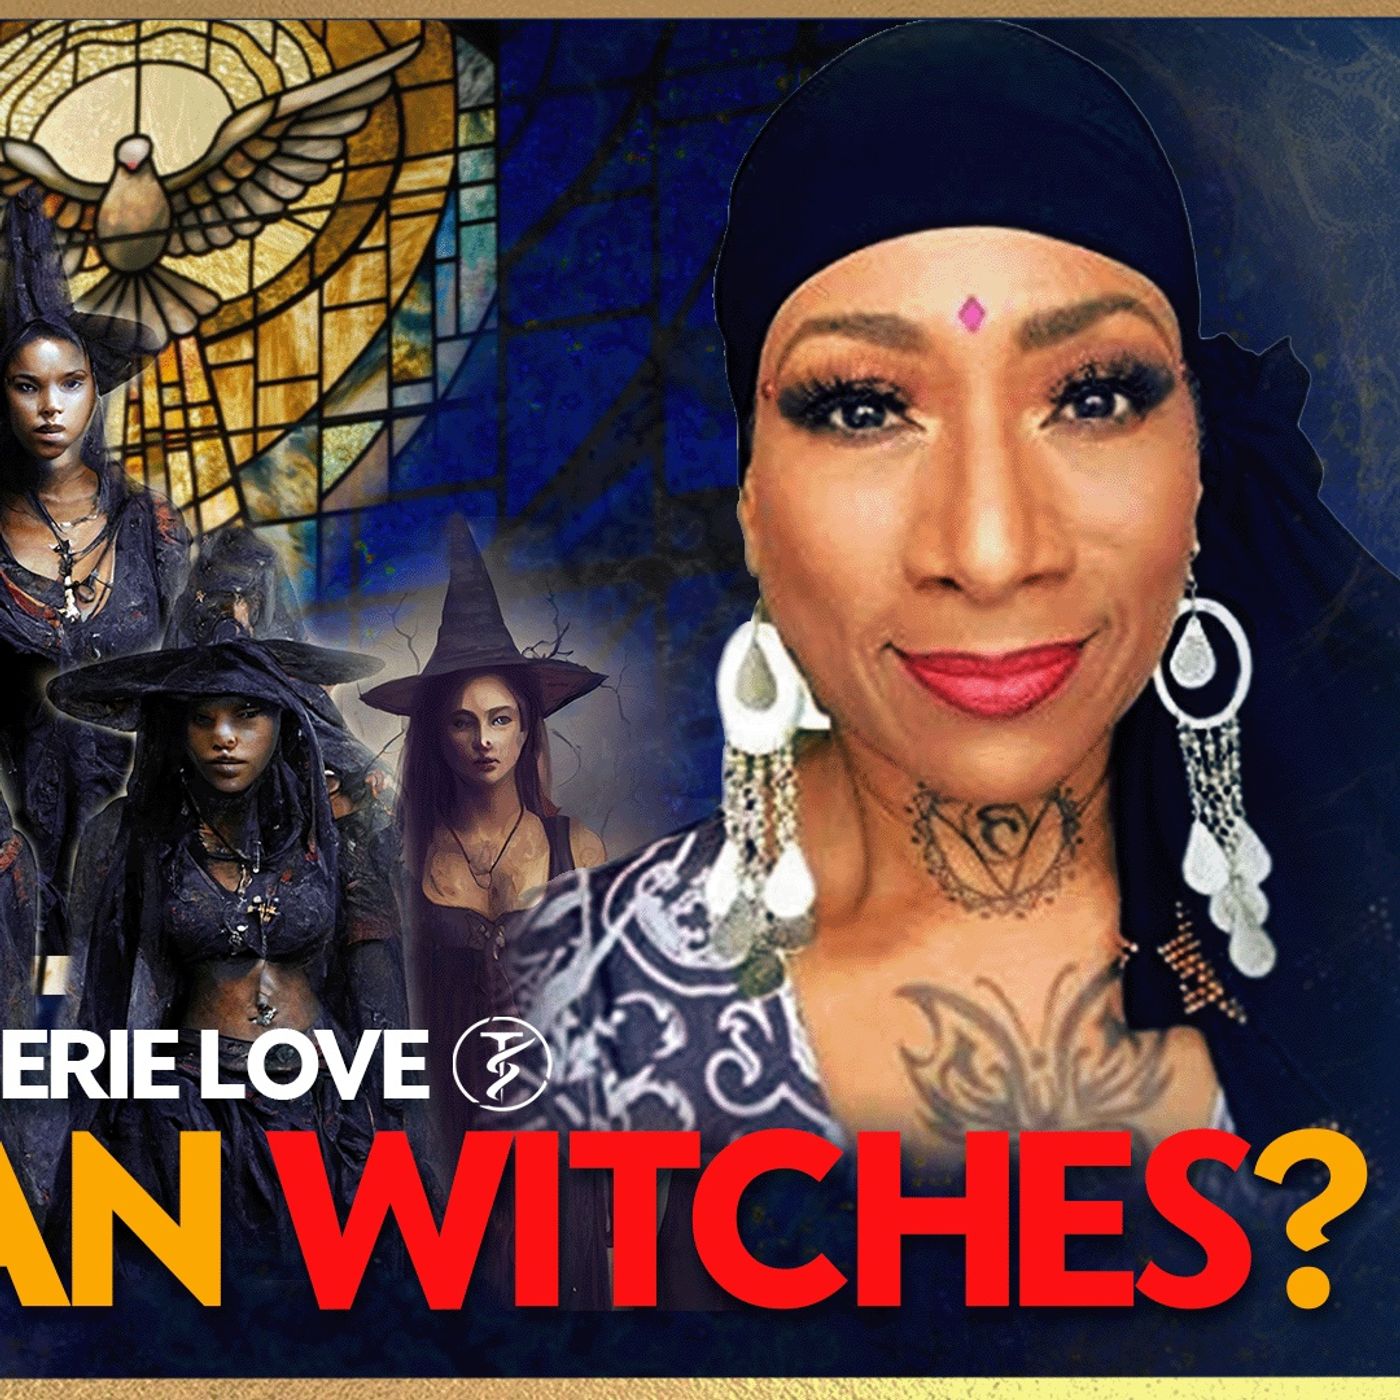 Can A Christian Be A Witch? - Rev. Valerie Love ”KAISI”